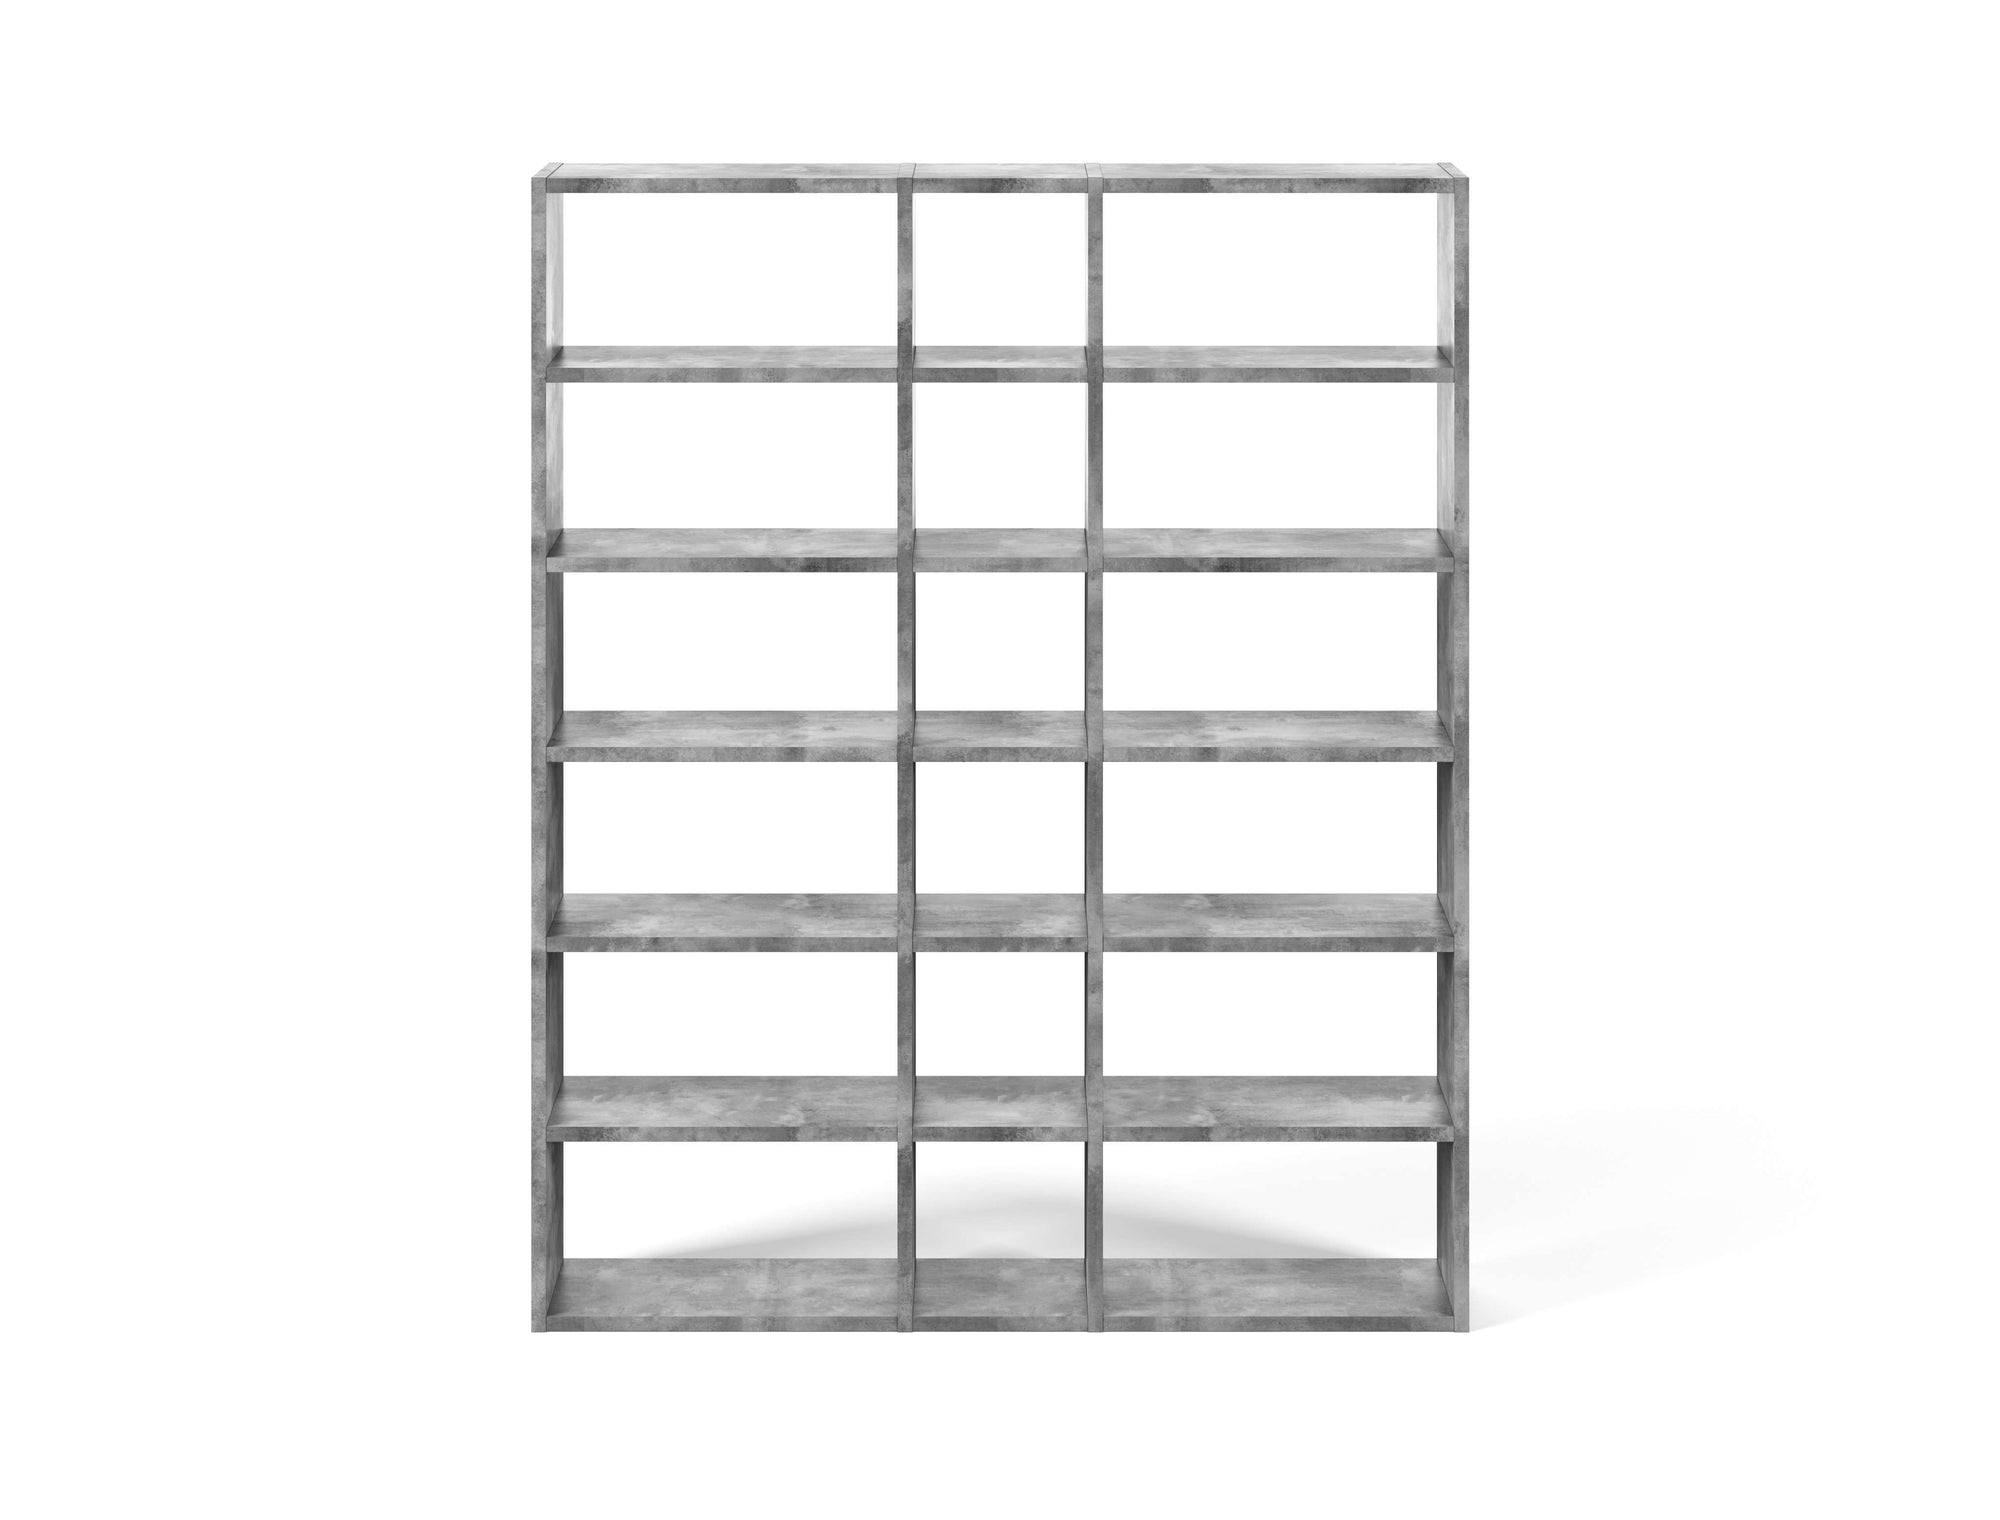 Tema Home-Pombal Composition 2010-018 004020-POMBAL18-Bookcase-MODTEMPO